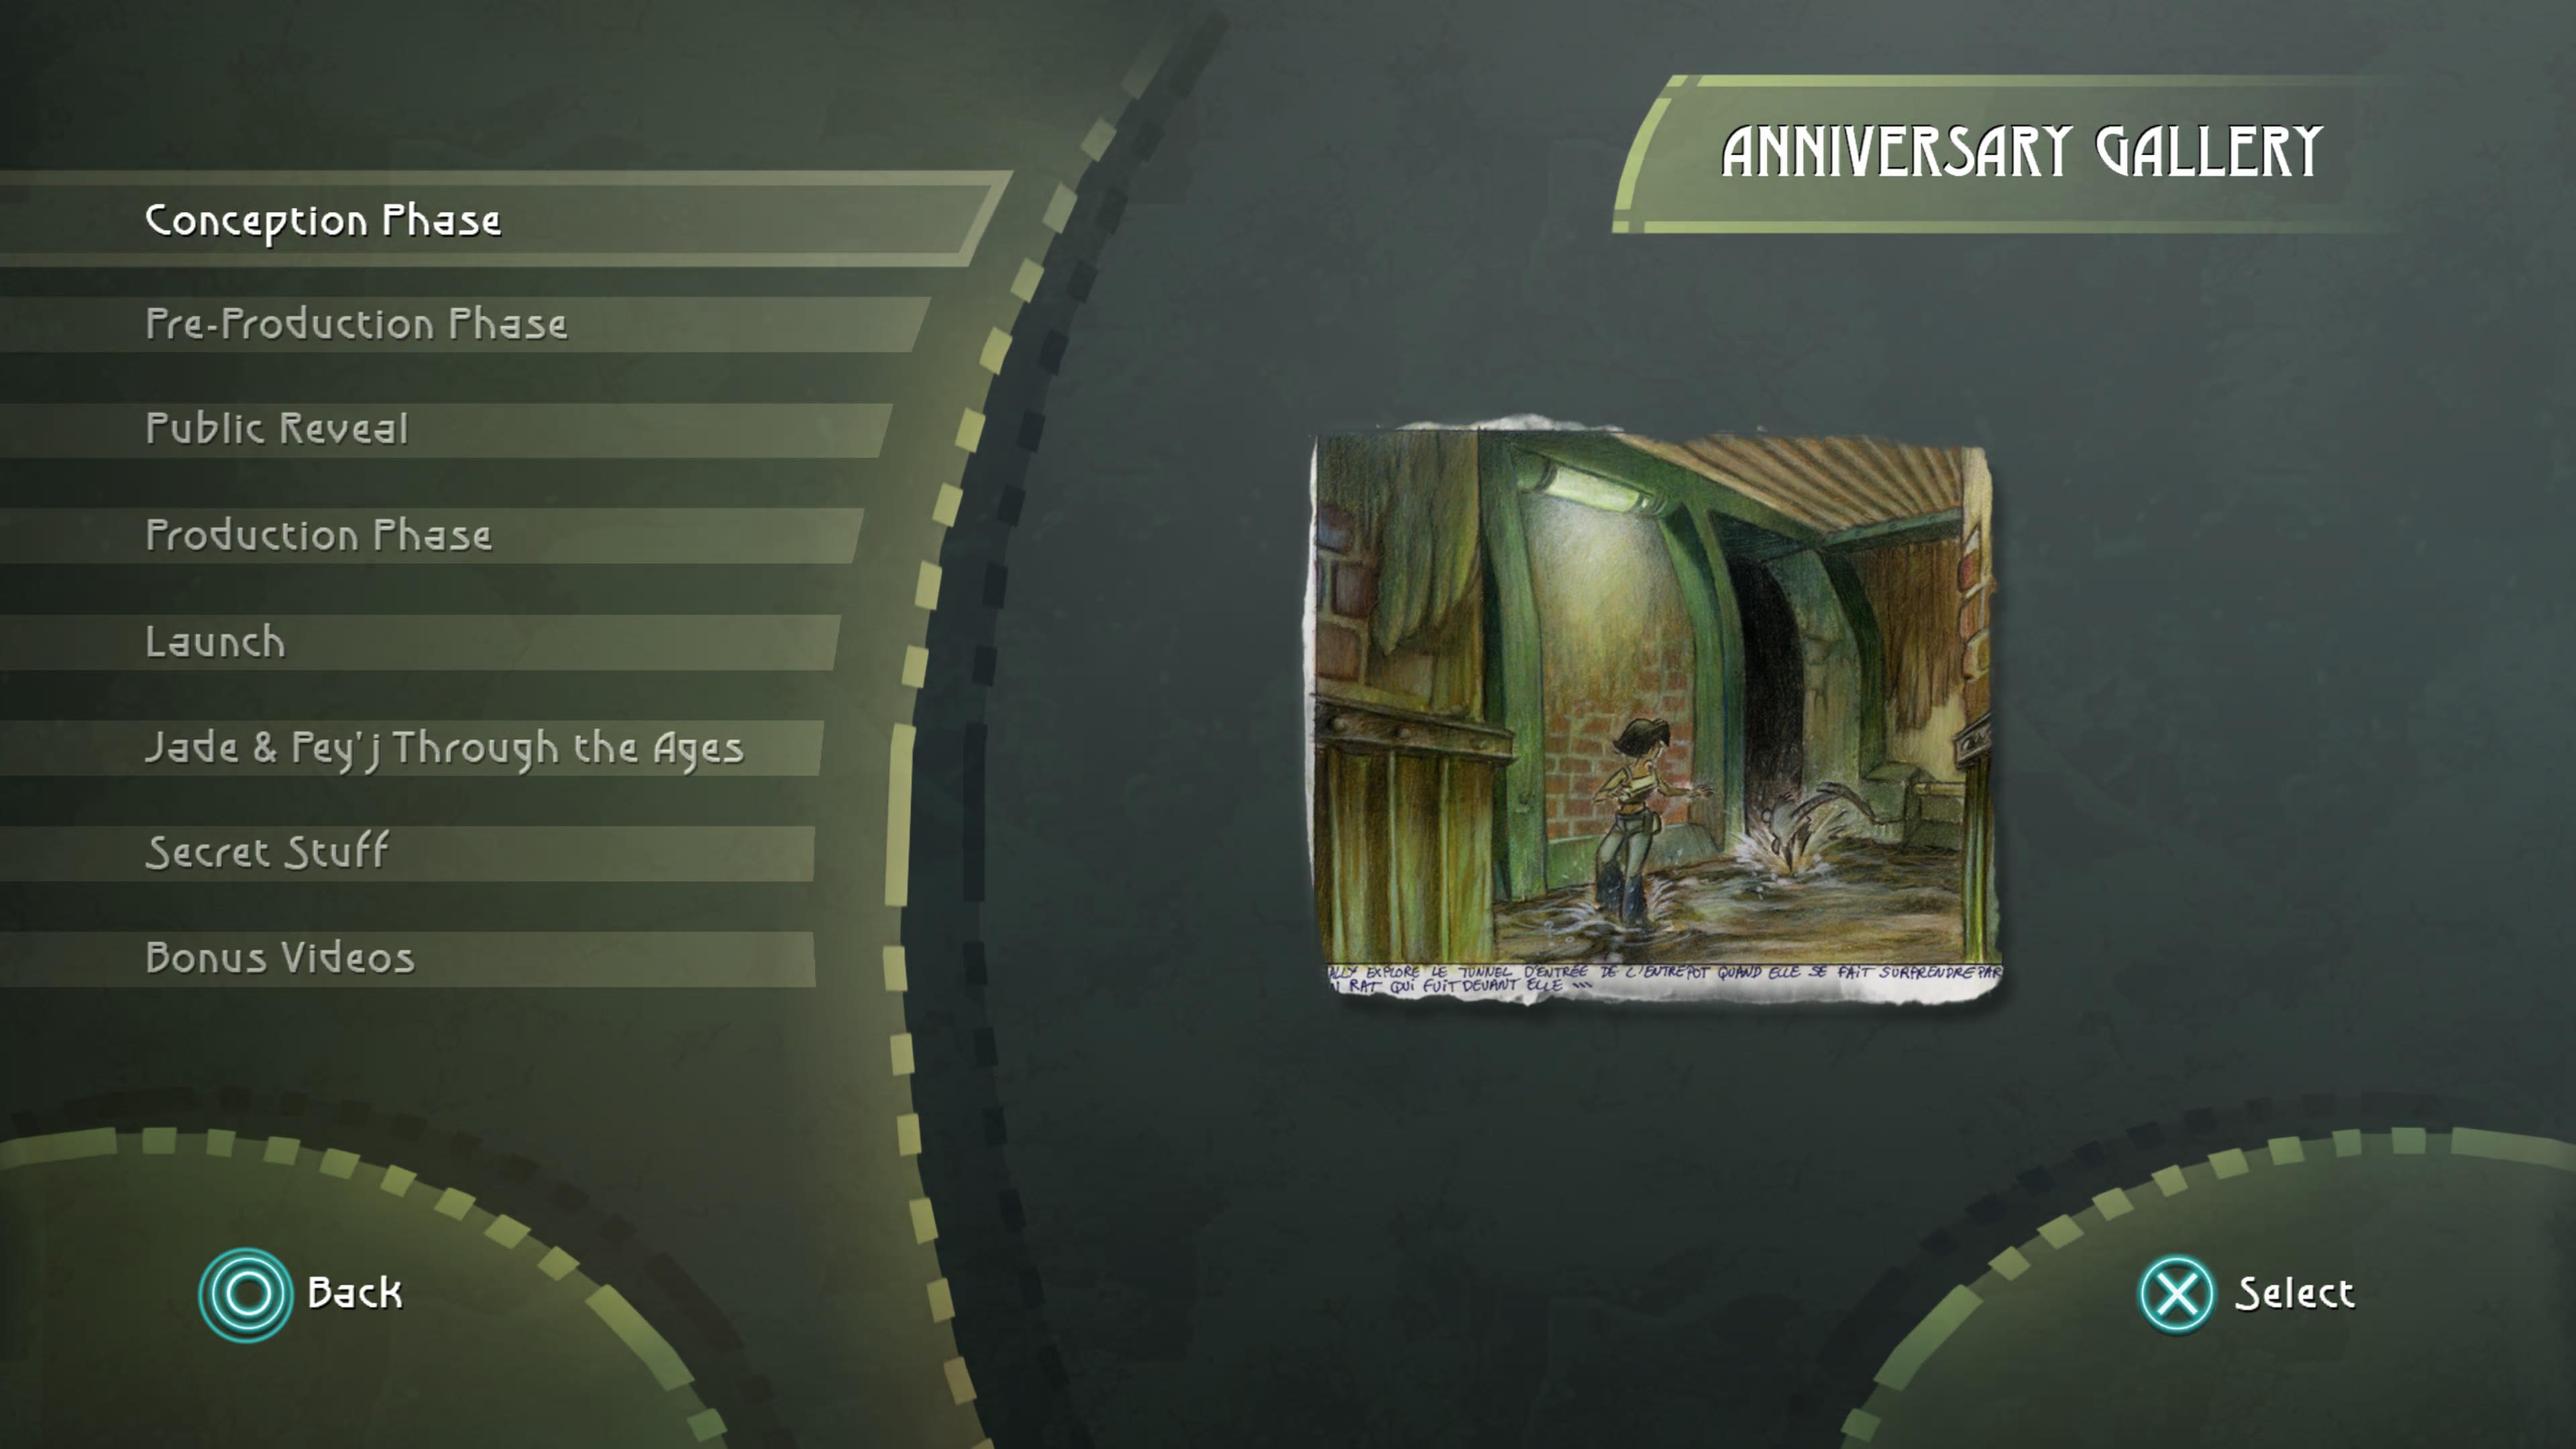 The main menu of the Anniversary Gallery in Beyond Good & Evil: 20th Anniversary Edition.